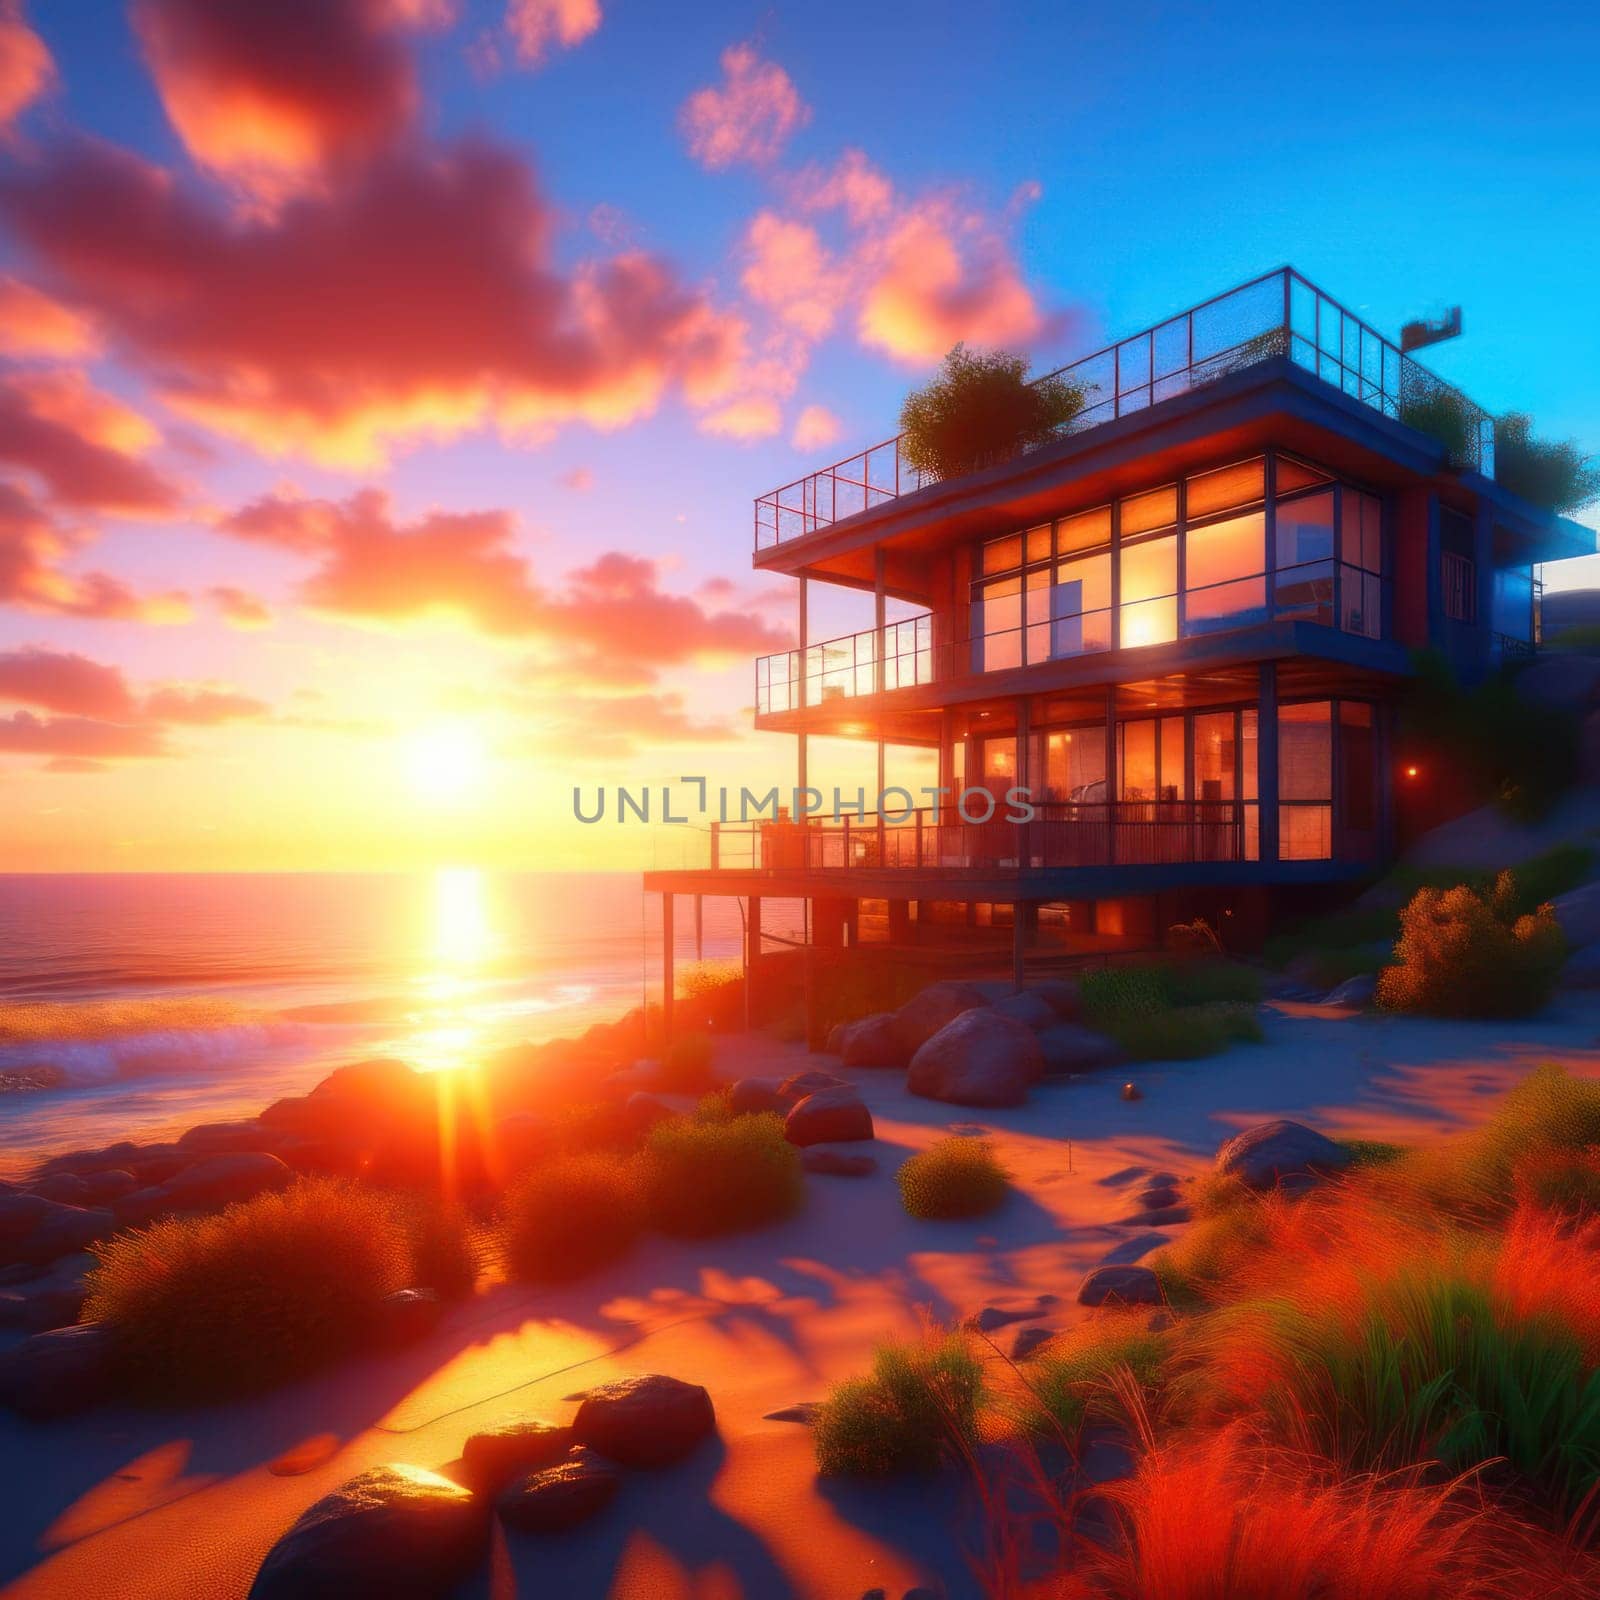 House by the sea by nolimit046